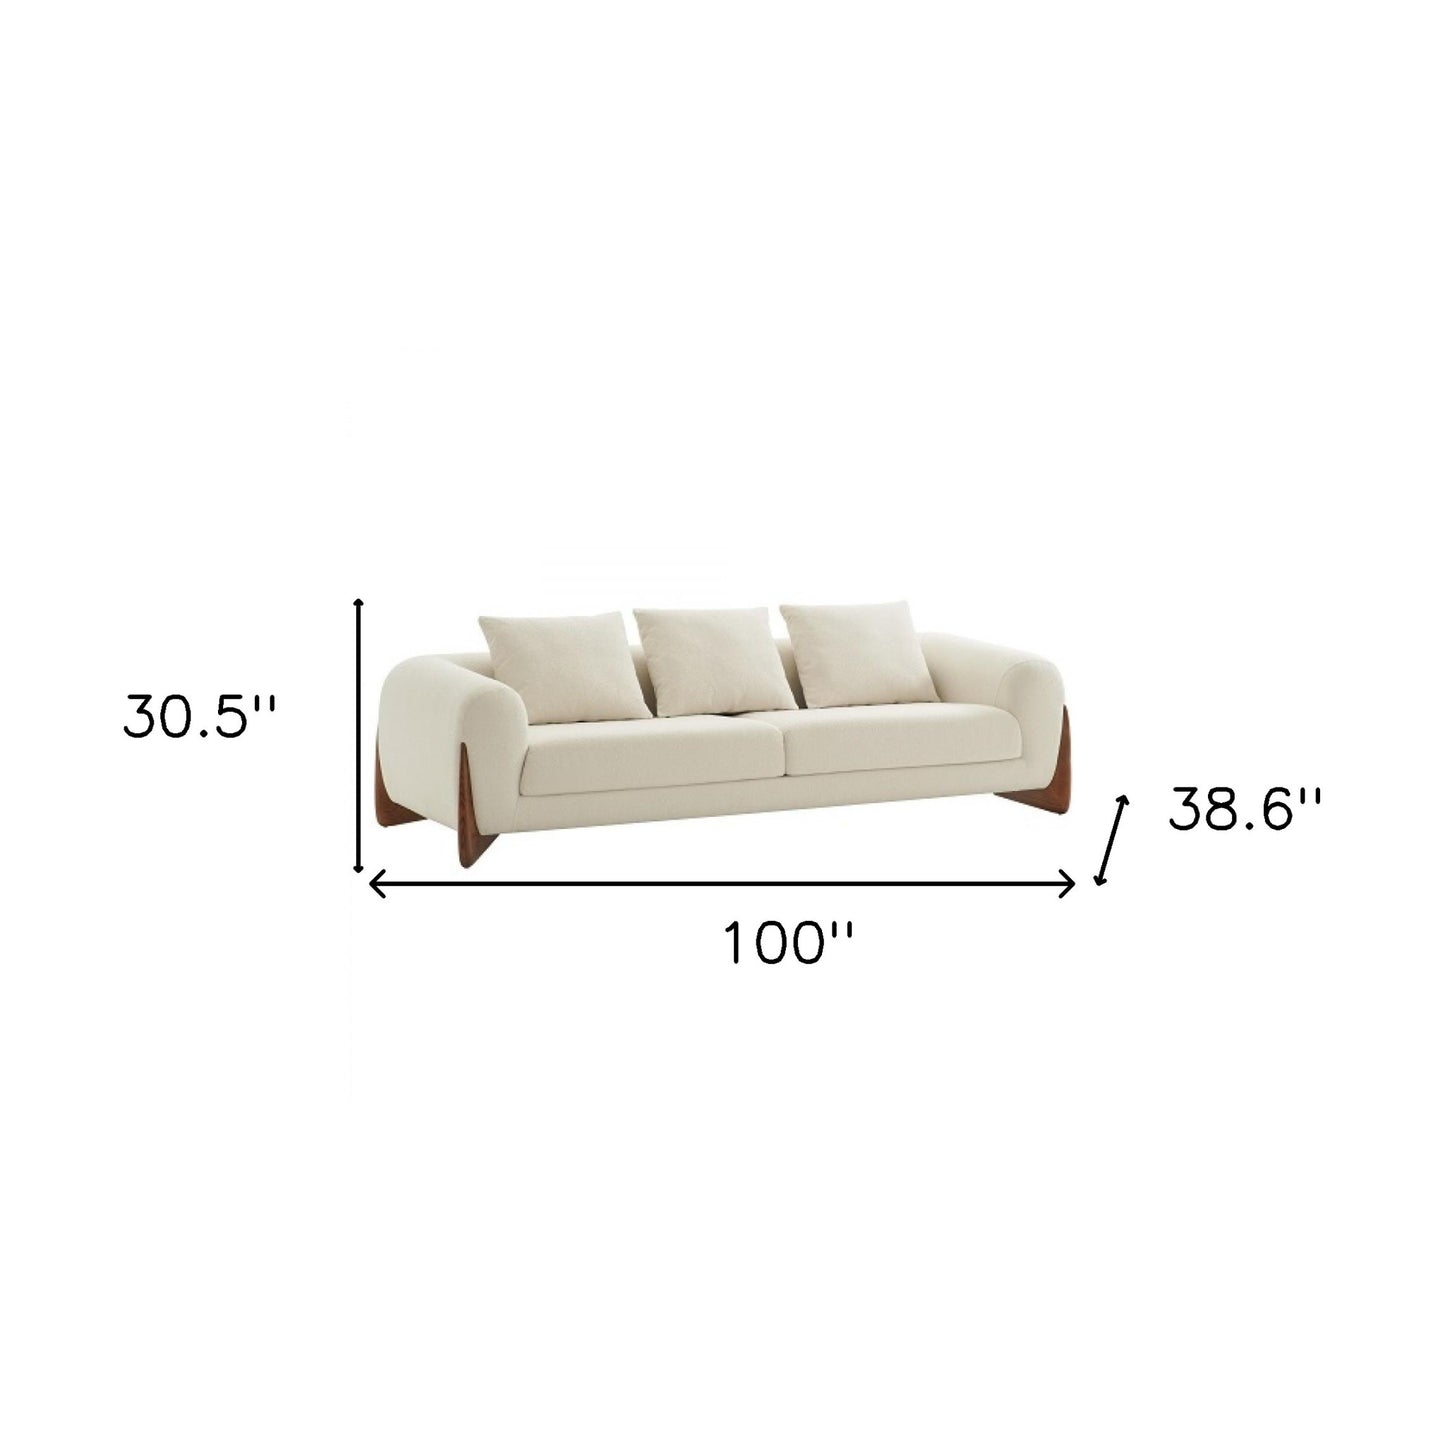 100" Cream Sofa With Wood Brown Legs